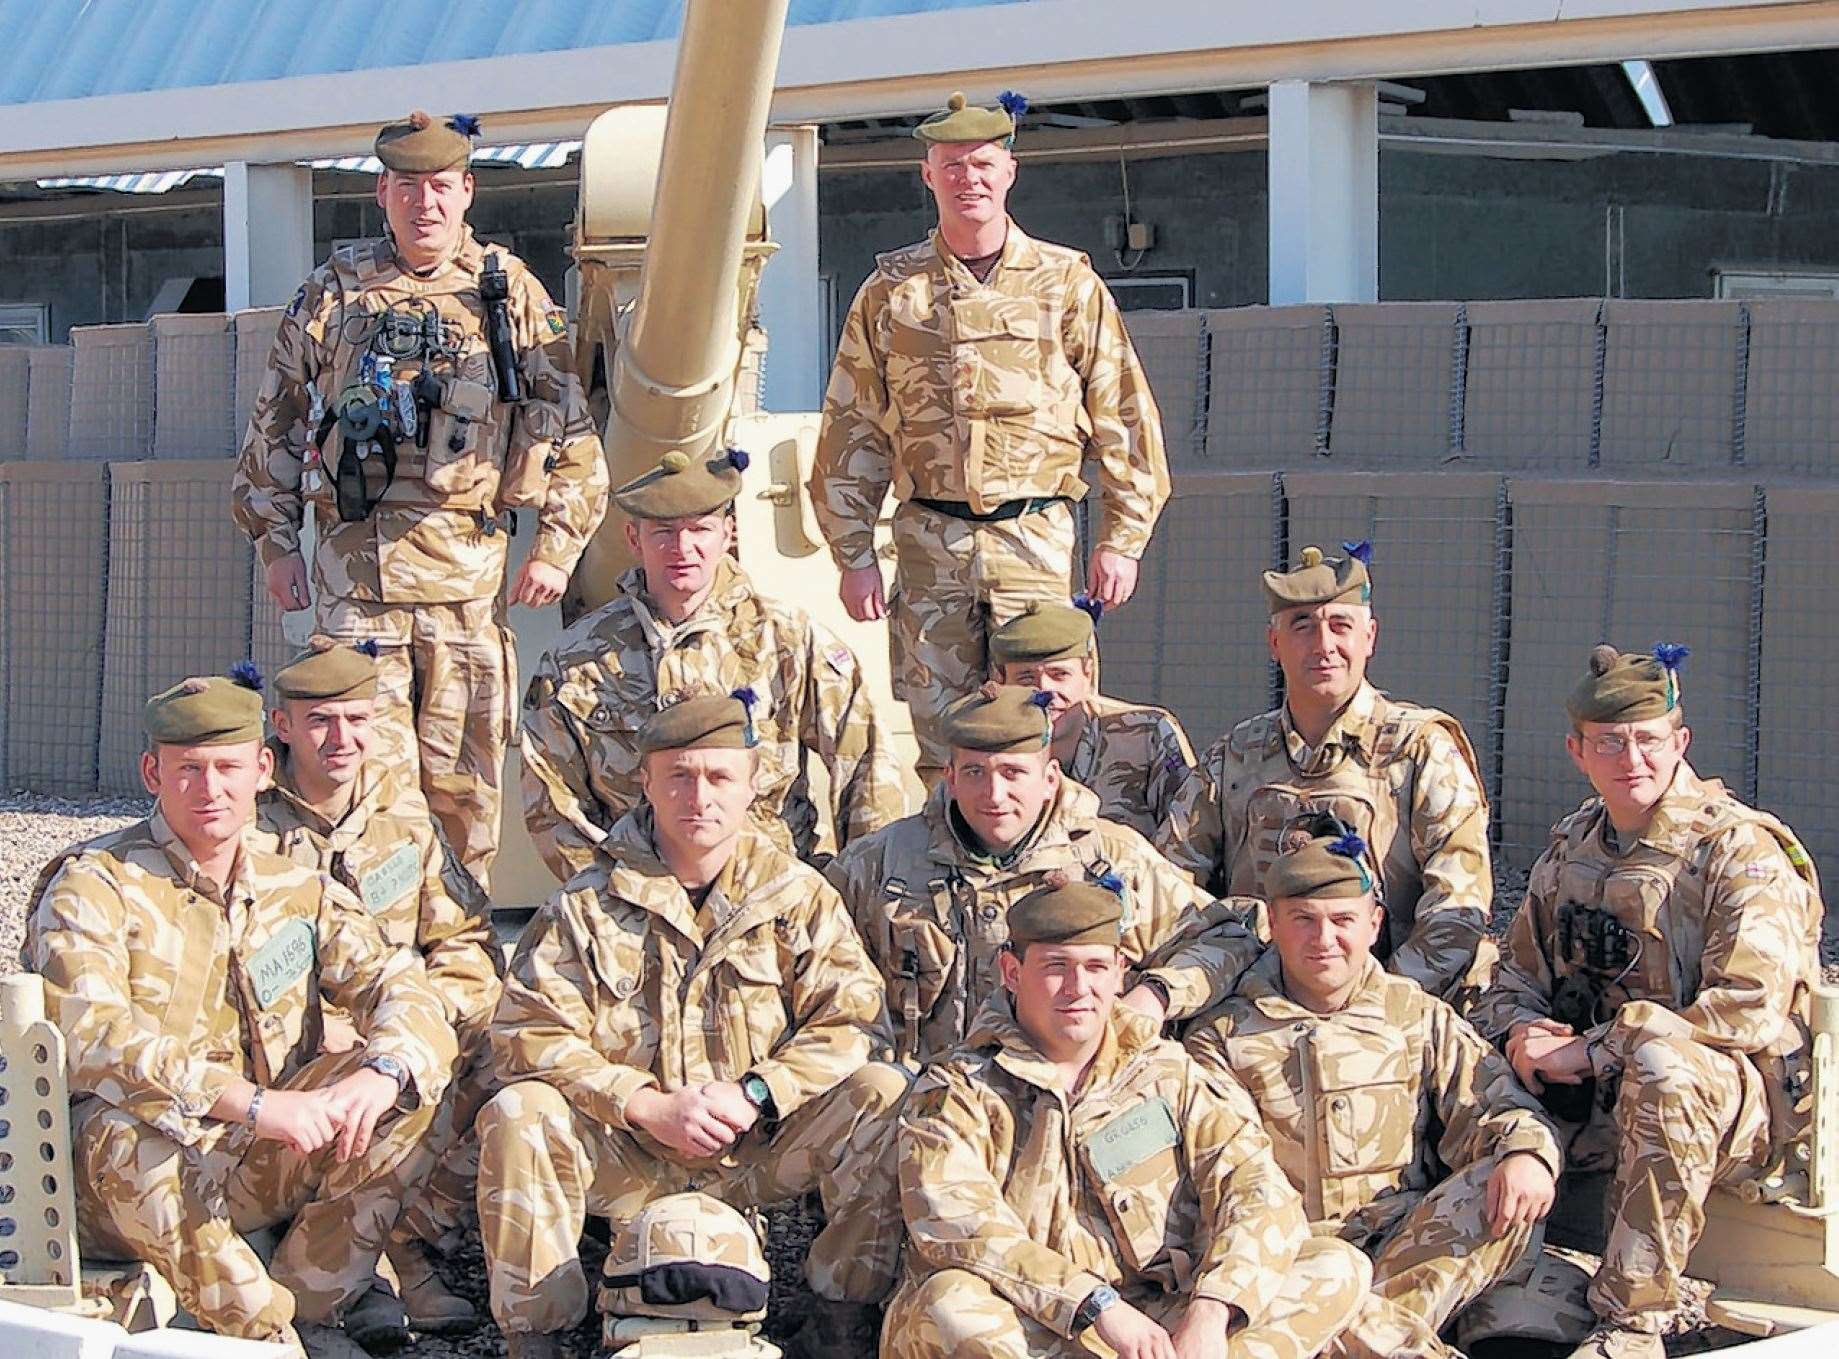 In 2006, a dozen Caithness reservists spending Christmas on peacekeeping duties in Iraq sent out a message of thanks for the public support since their deployment.